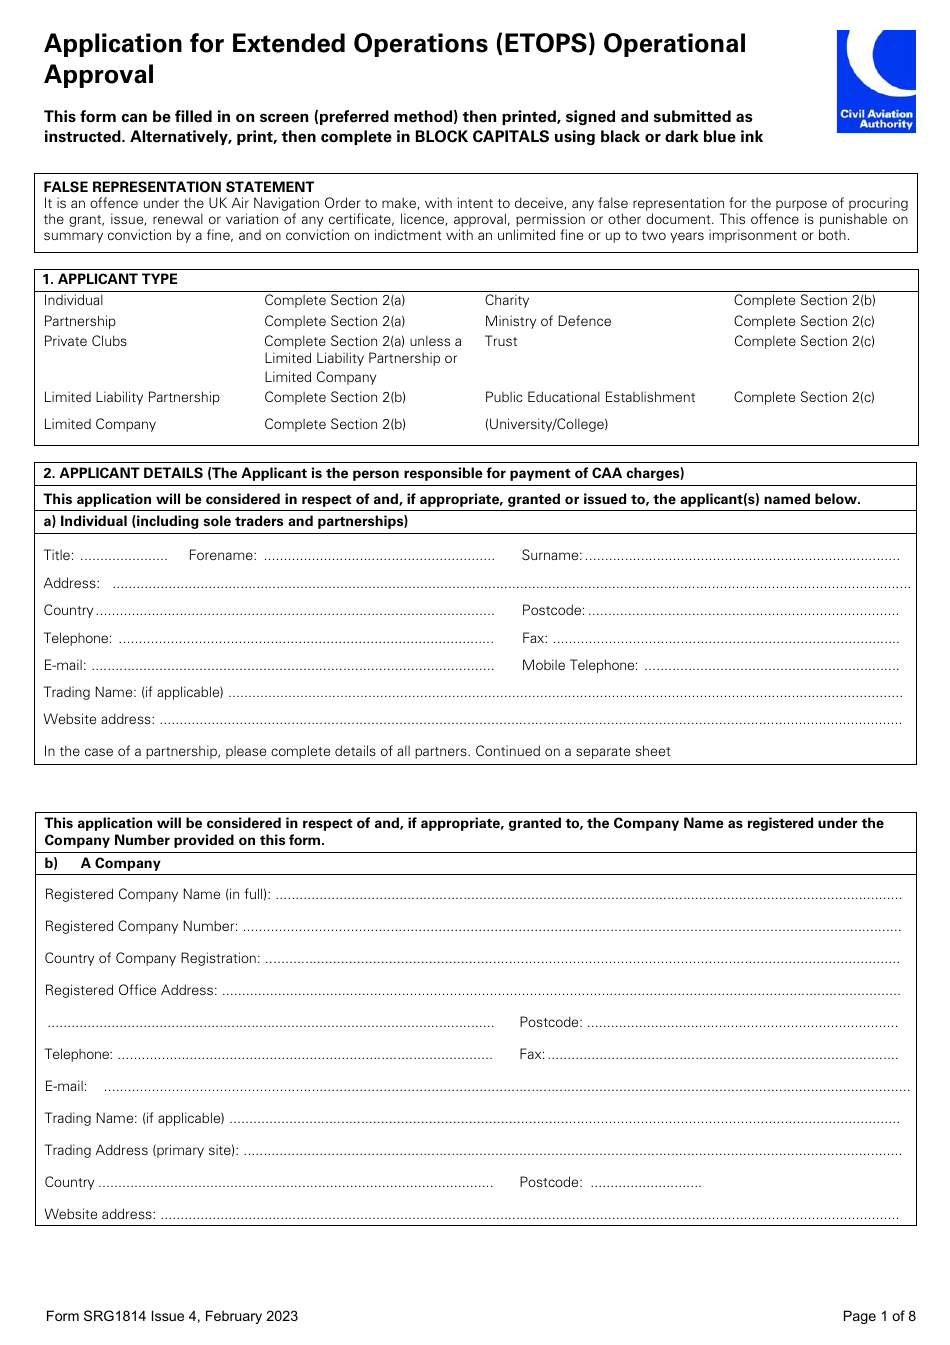 Form SRG1814 Application for Extended Operations (Etops) Operational Approval - United Kingdom, Page 1